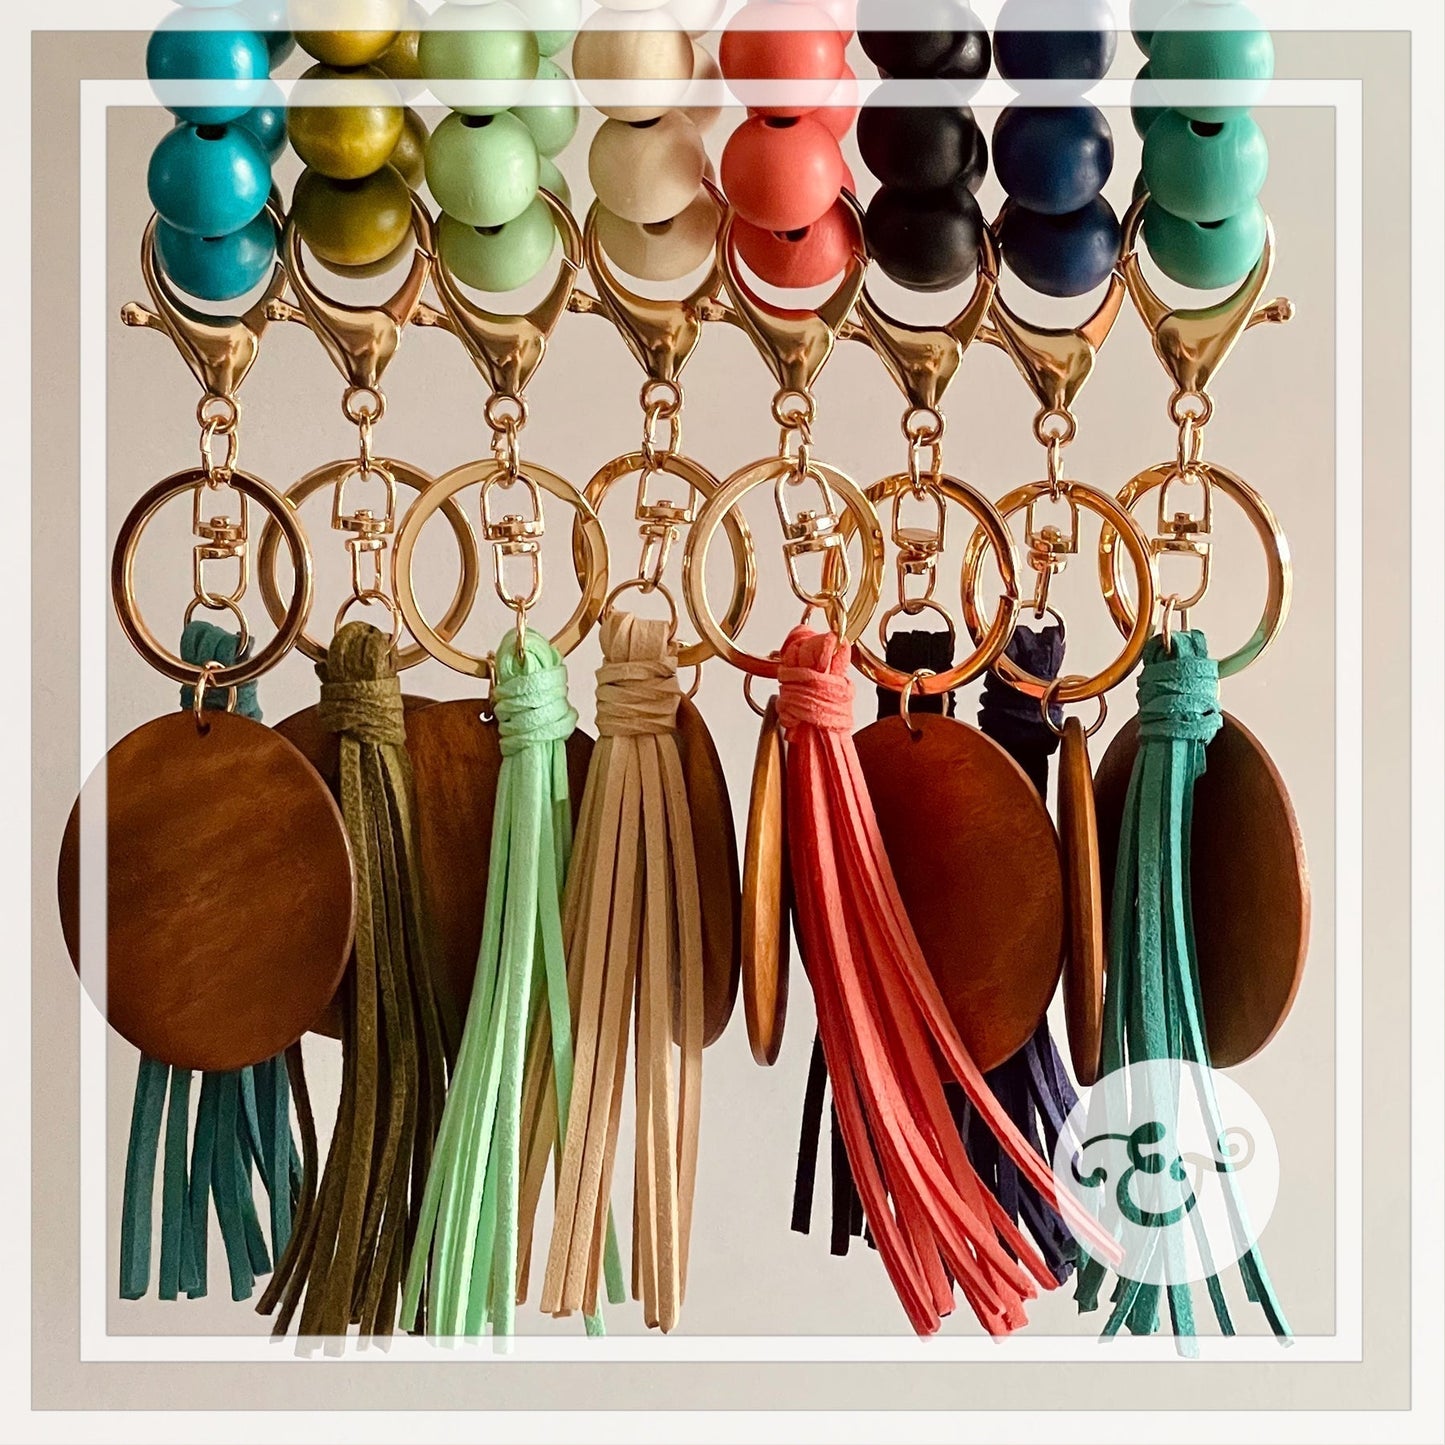 Wooden Bead Wristlets With Suede Tassel (6688691257422) (6688719405134) (6688894517326) (6688895270990) (6688896057422)